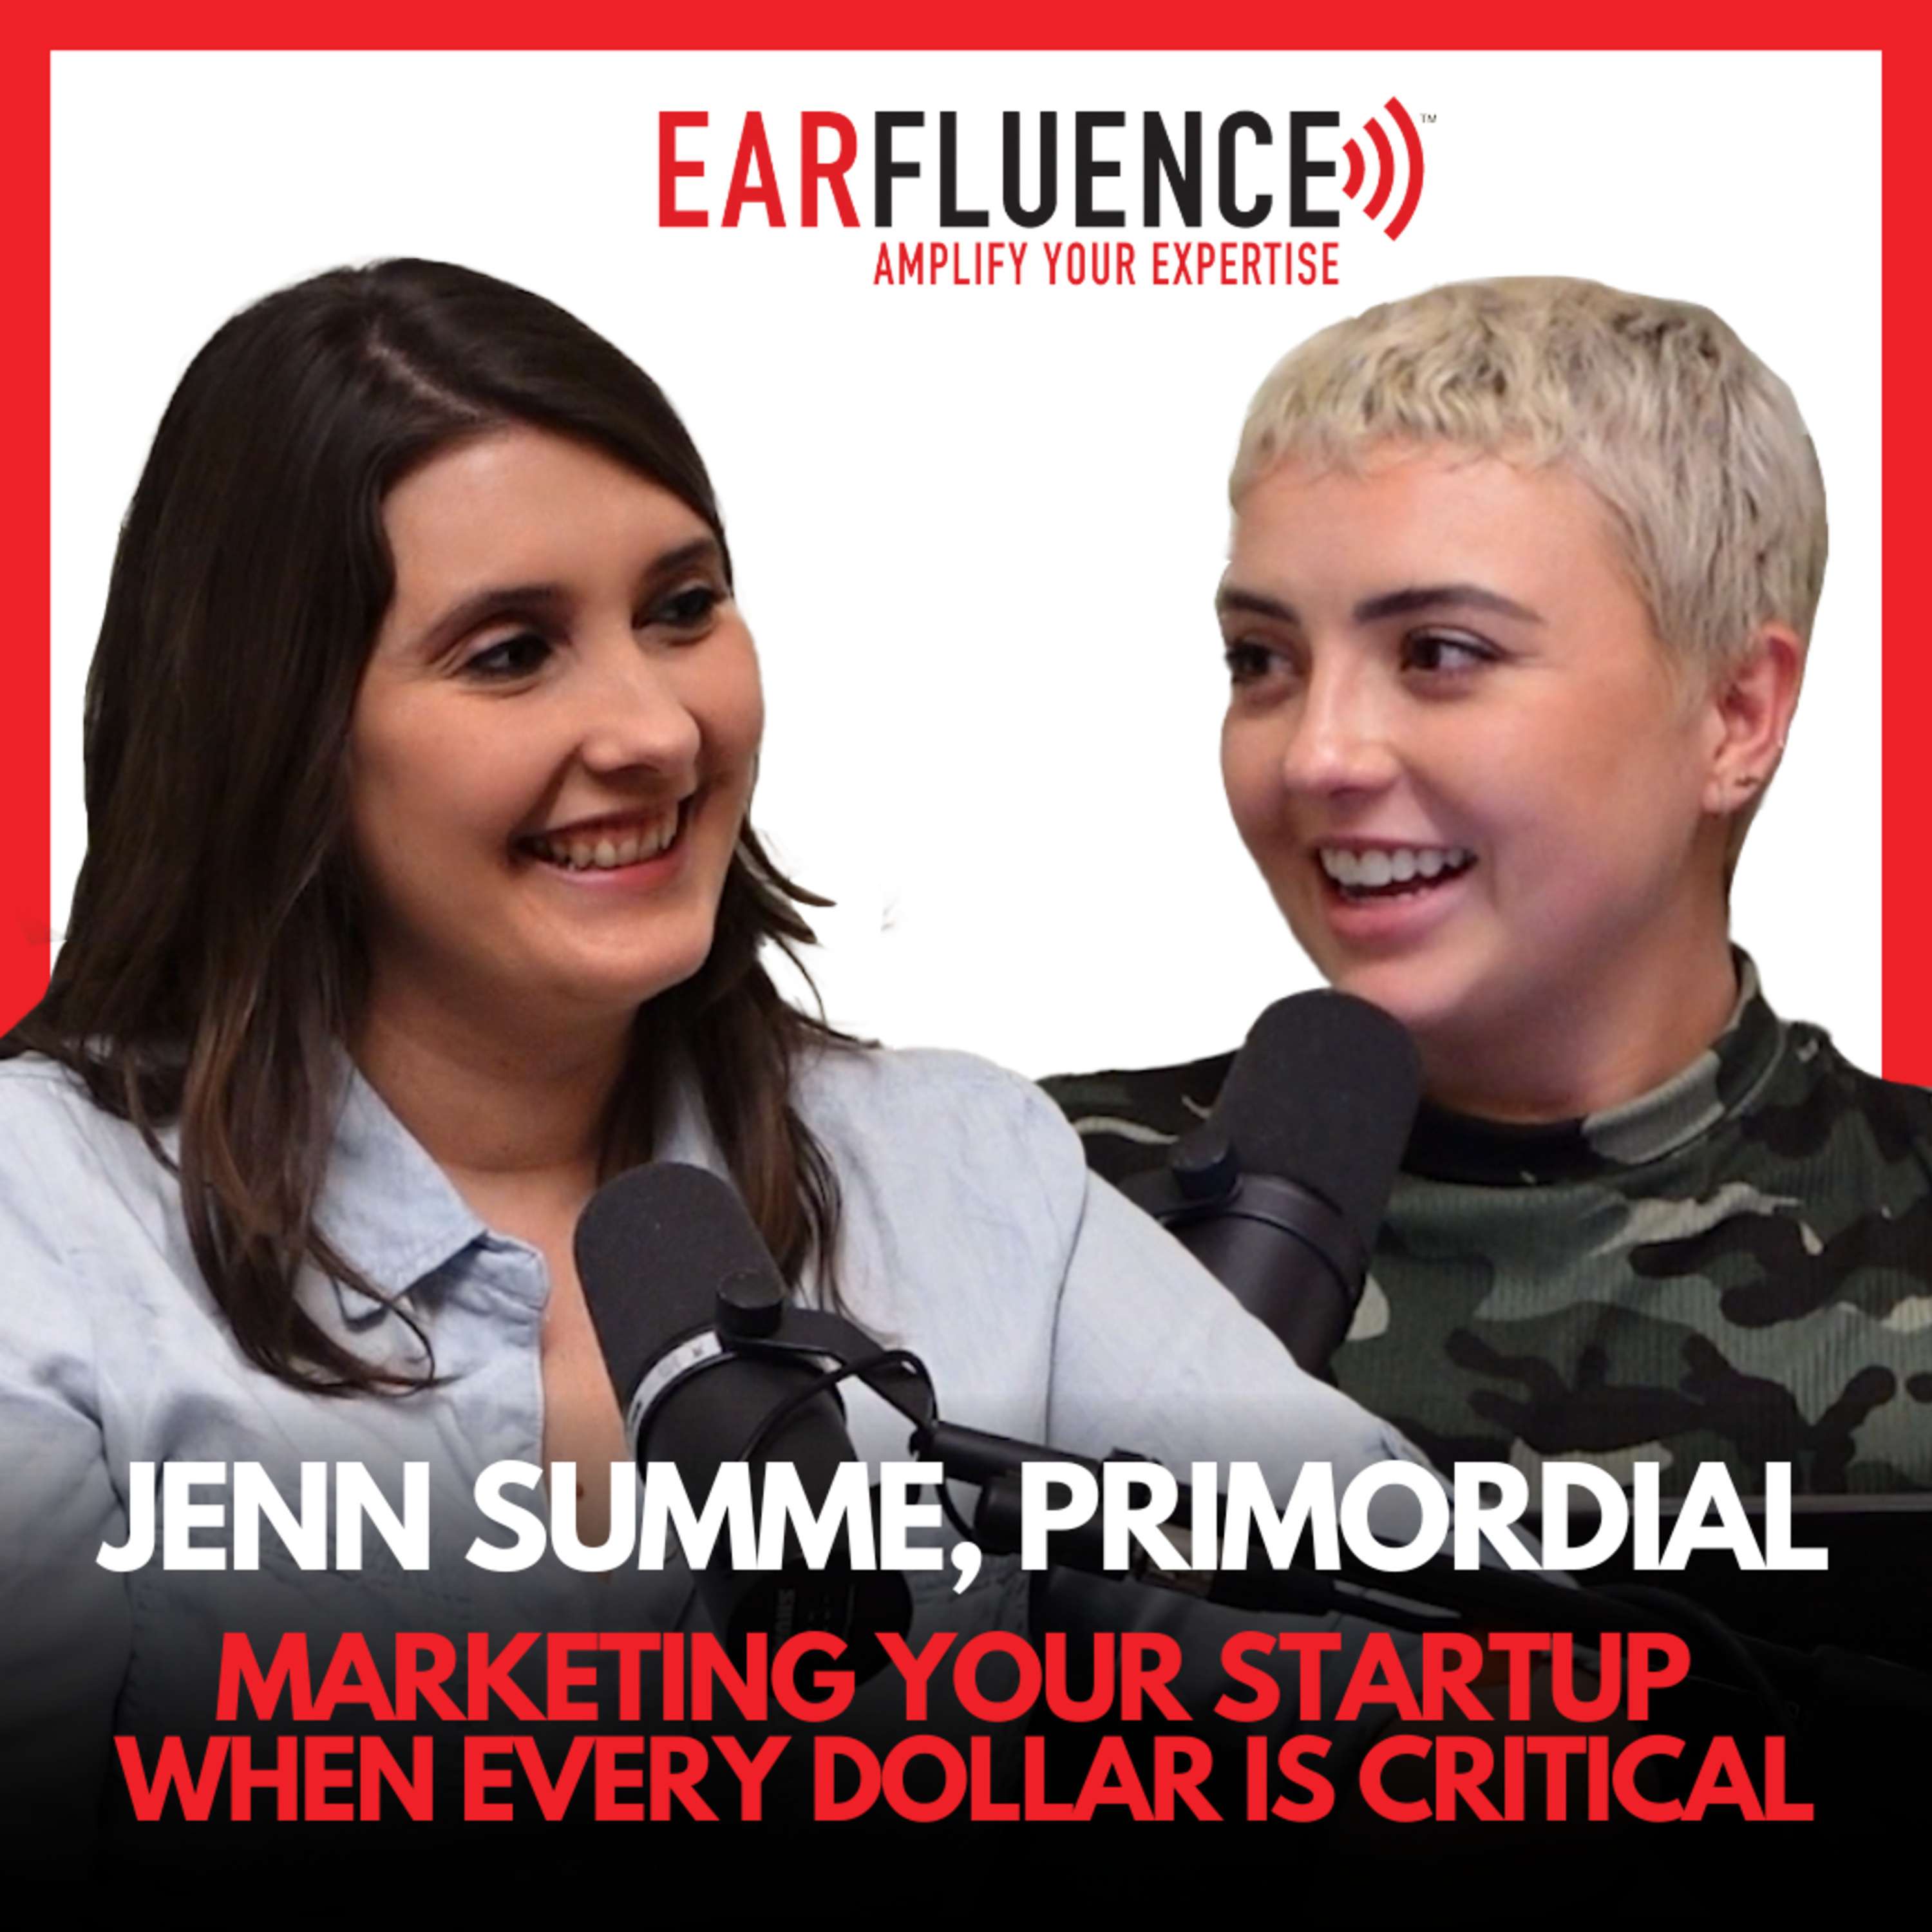 Marketing Your Startup When Every Dollar Matters, with Jenn Summe